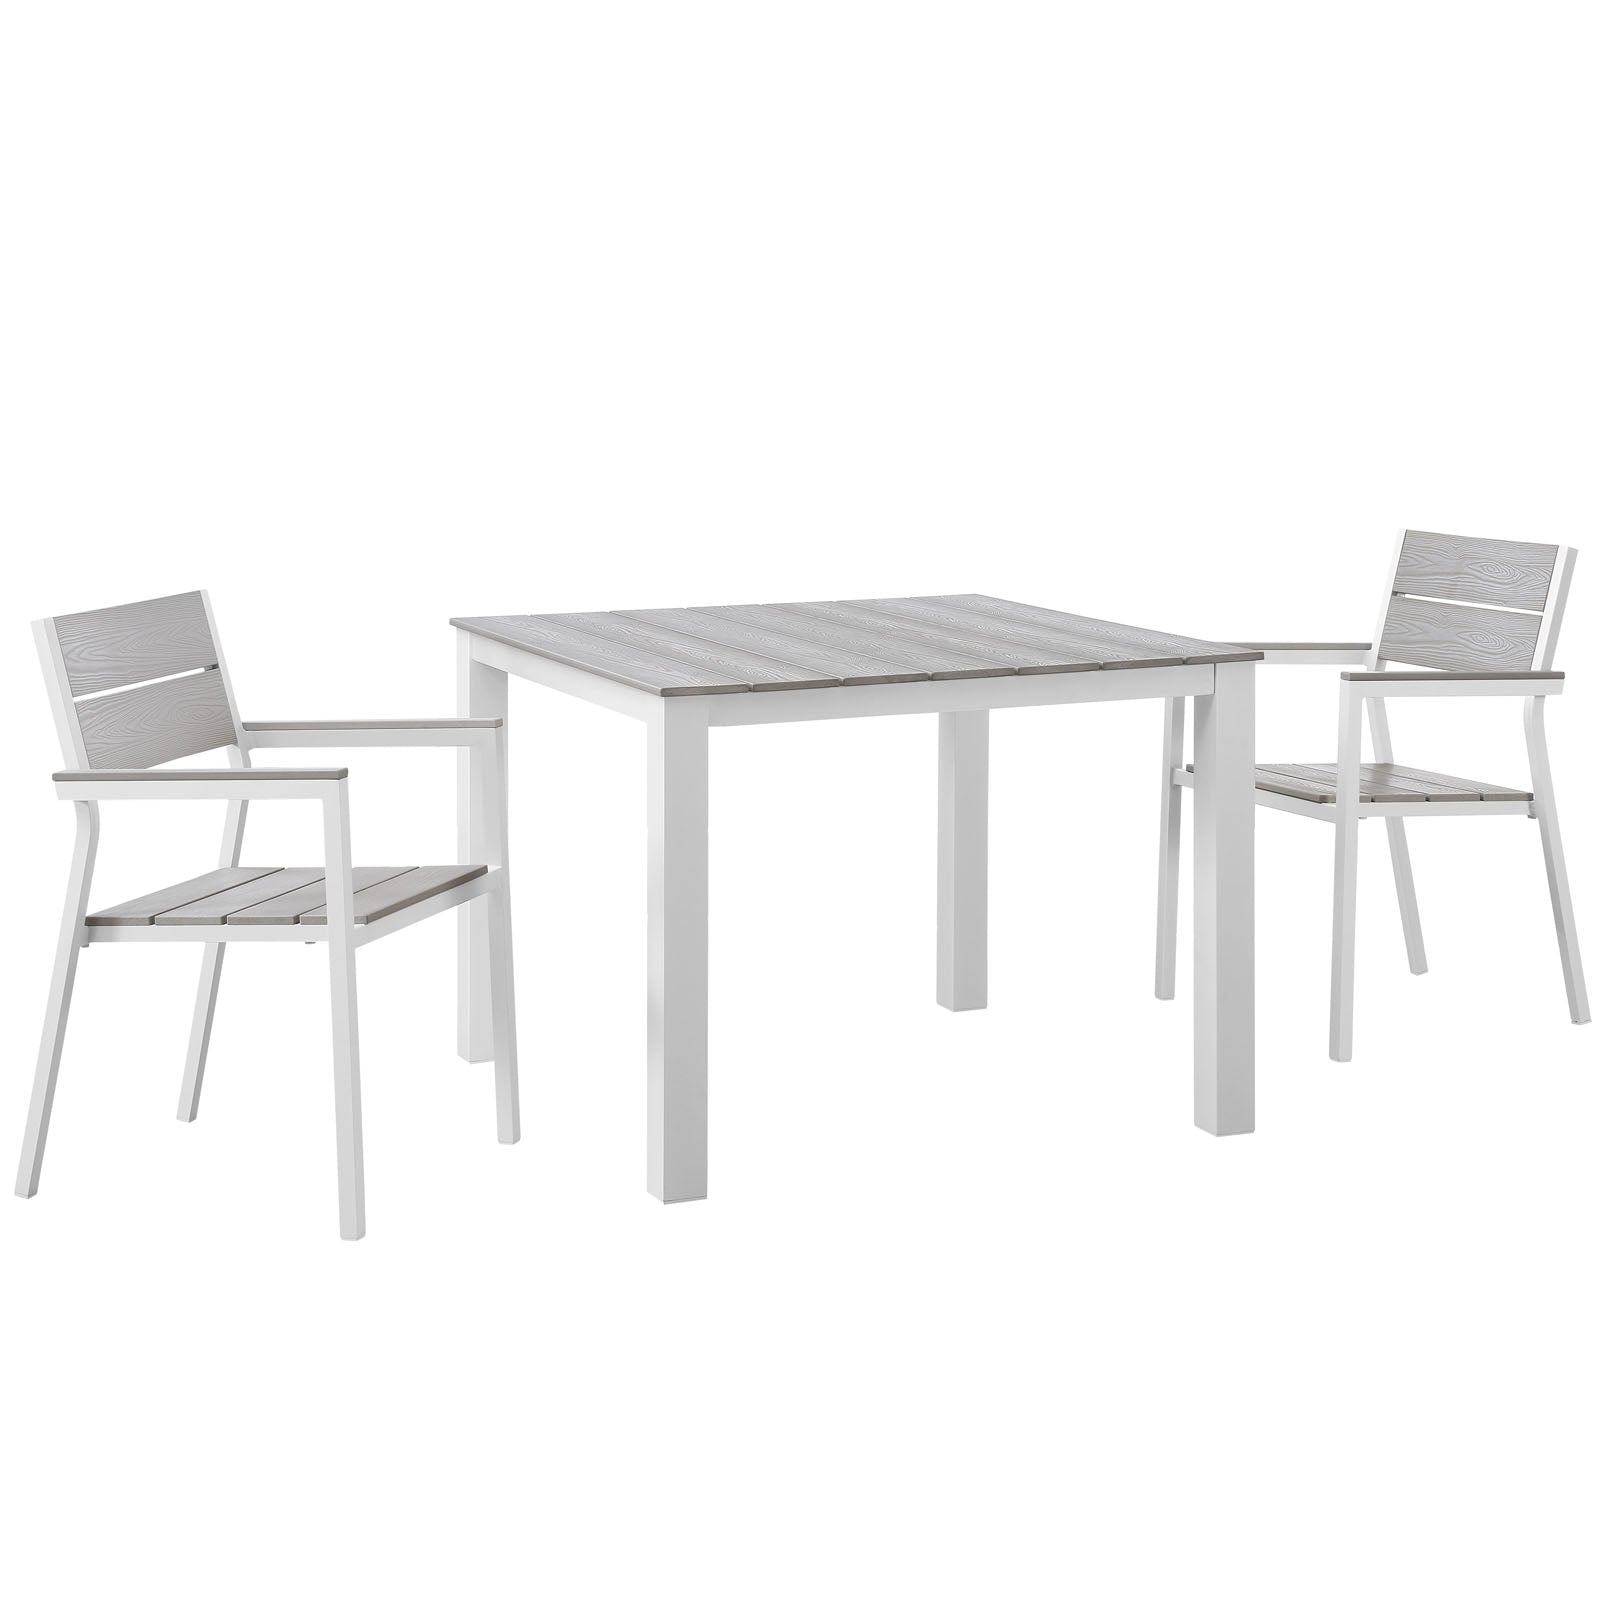 Maine 3 Piece Outdoor Patio Dining Set - East Shore Modern Home Furnishings